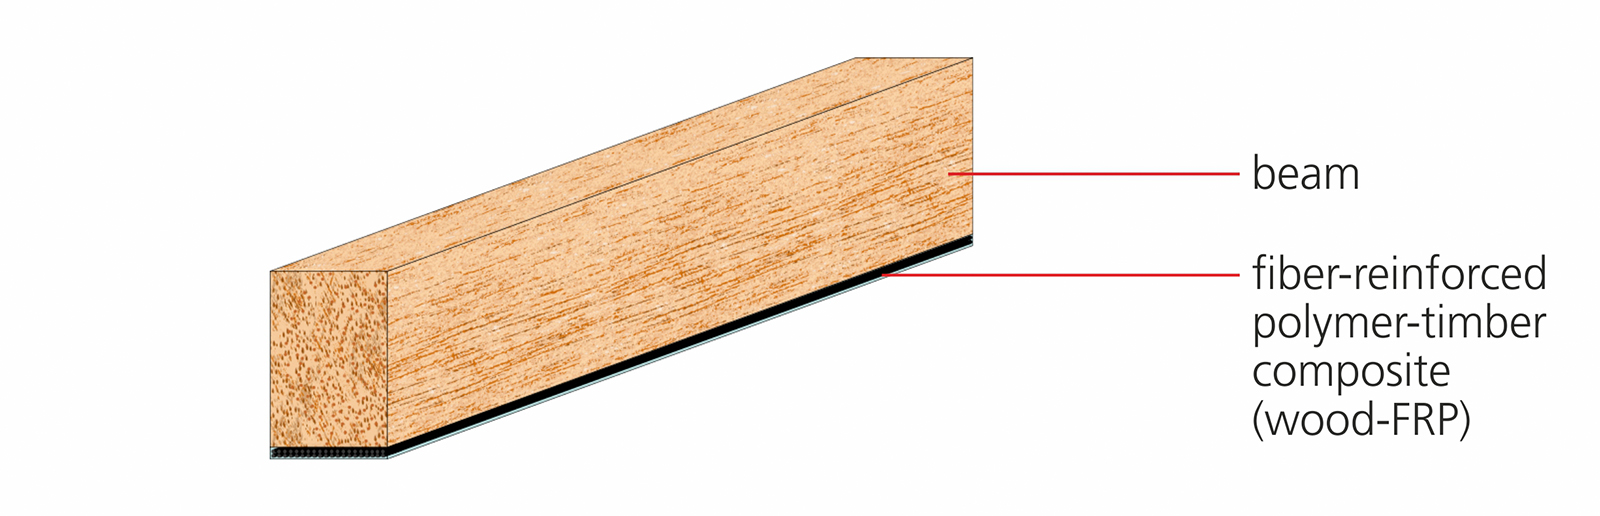 An example of FRP-timber composite (wood-FRP) for beam application.